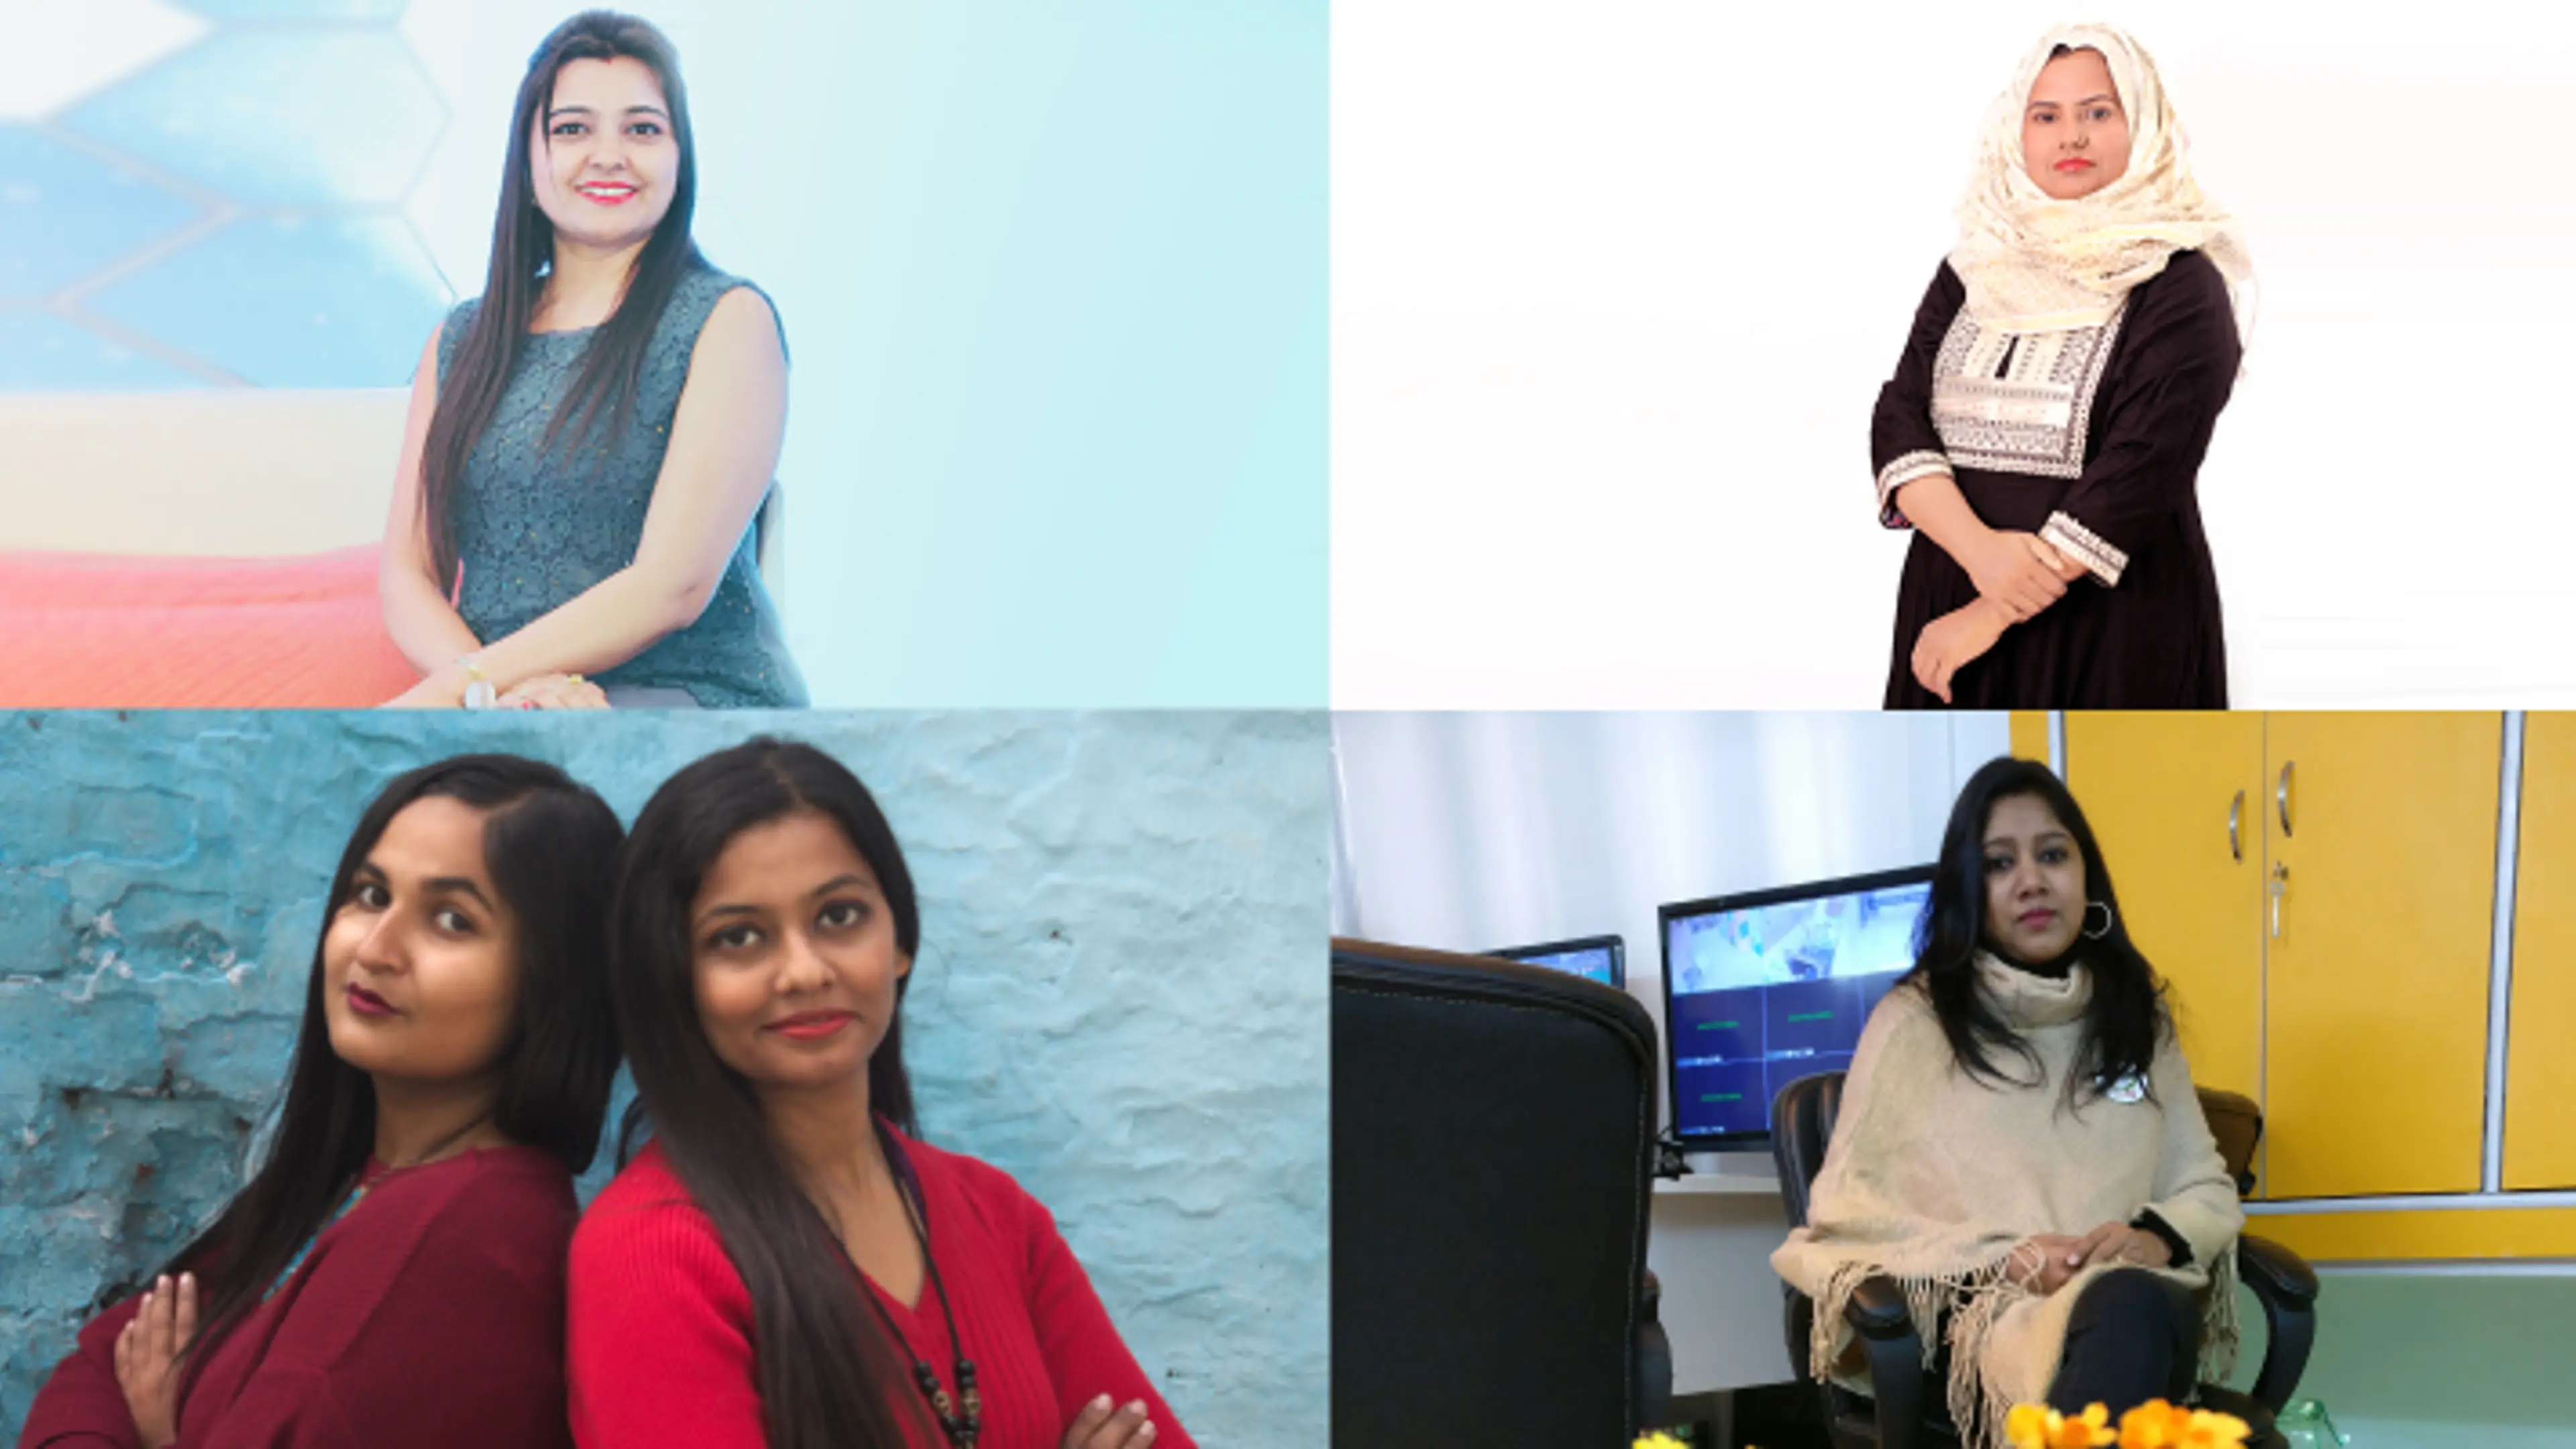 Meet five women entrepreneurs from Bihar who are riding the startup wave